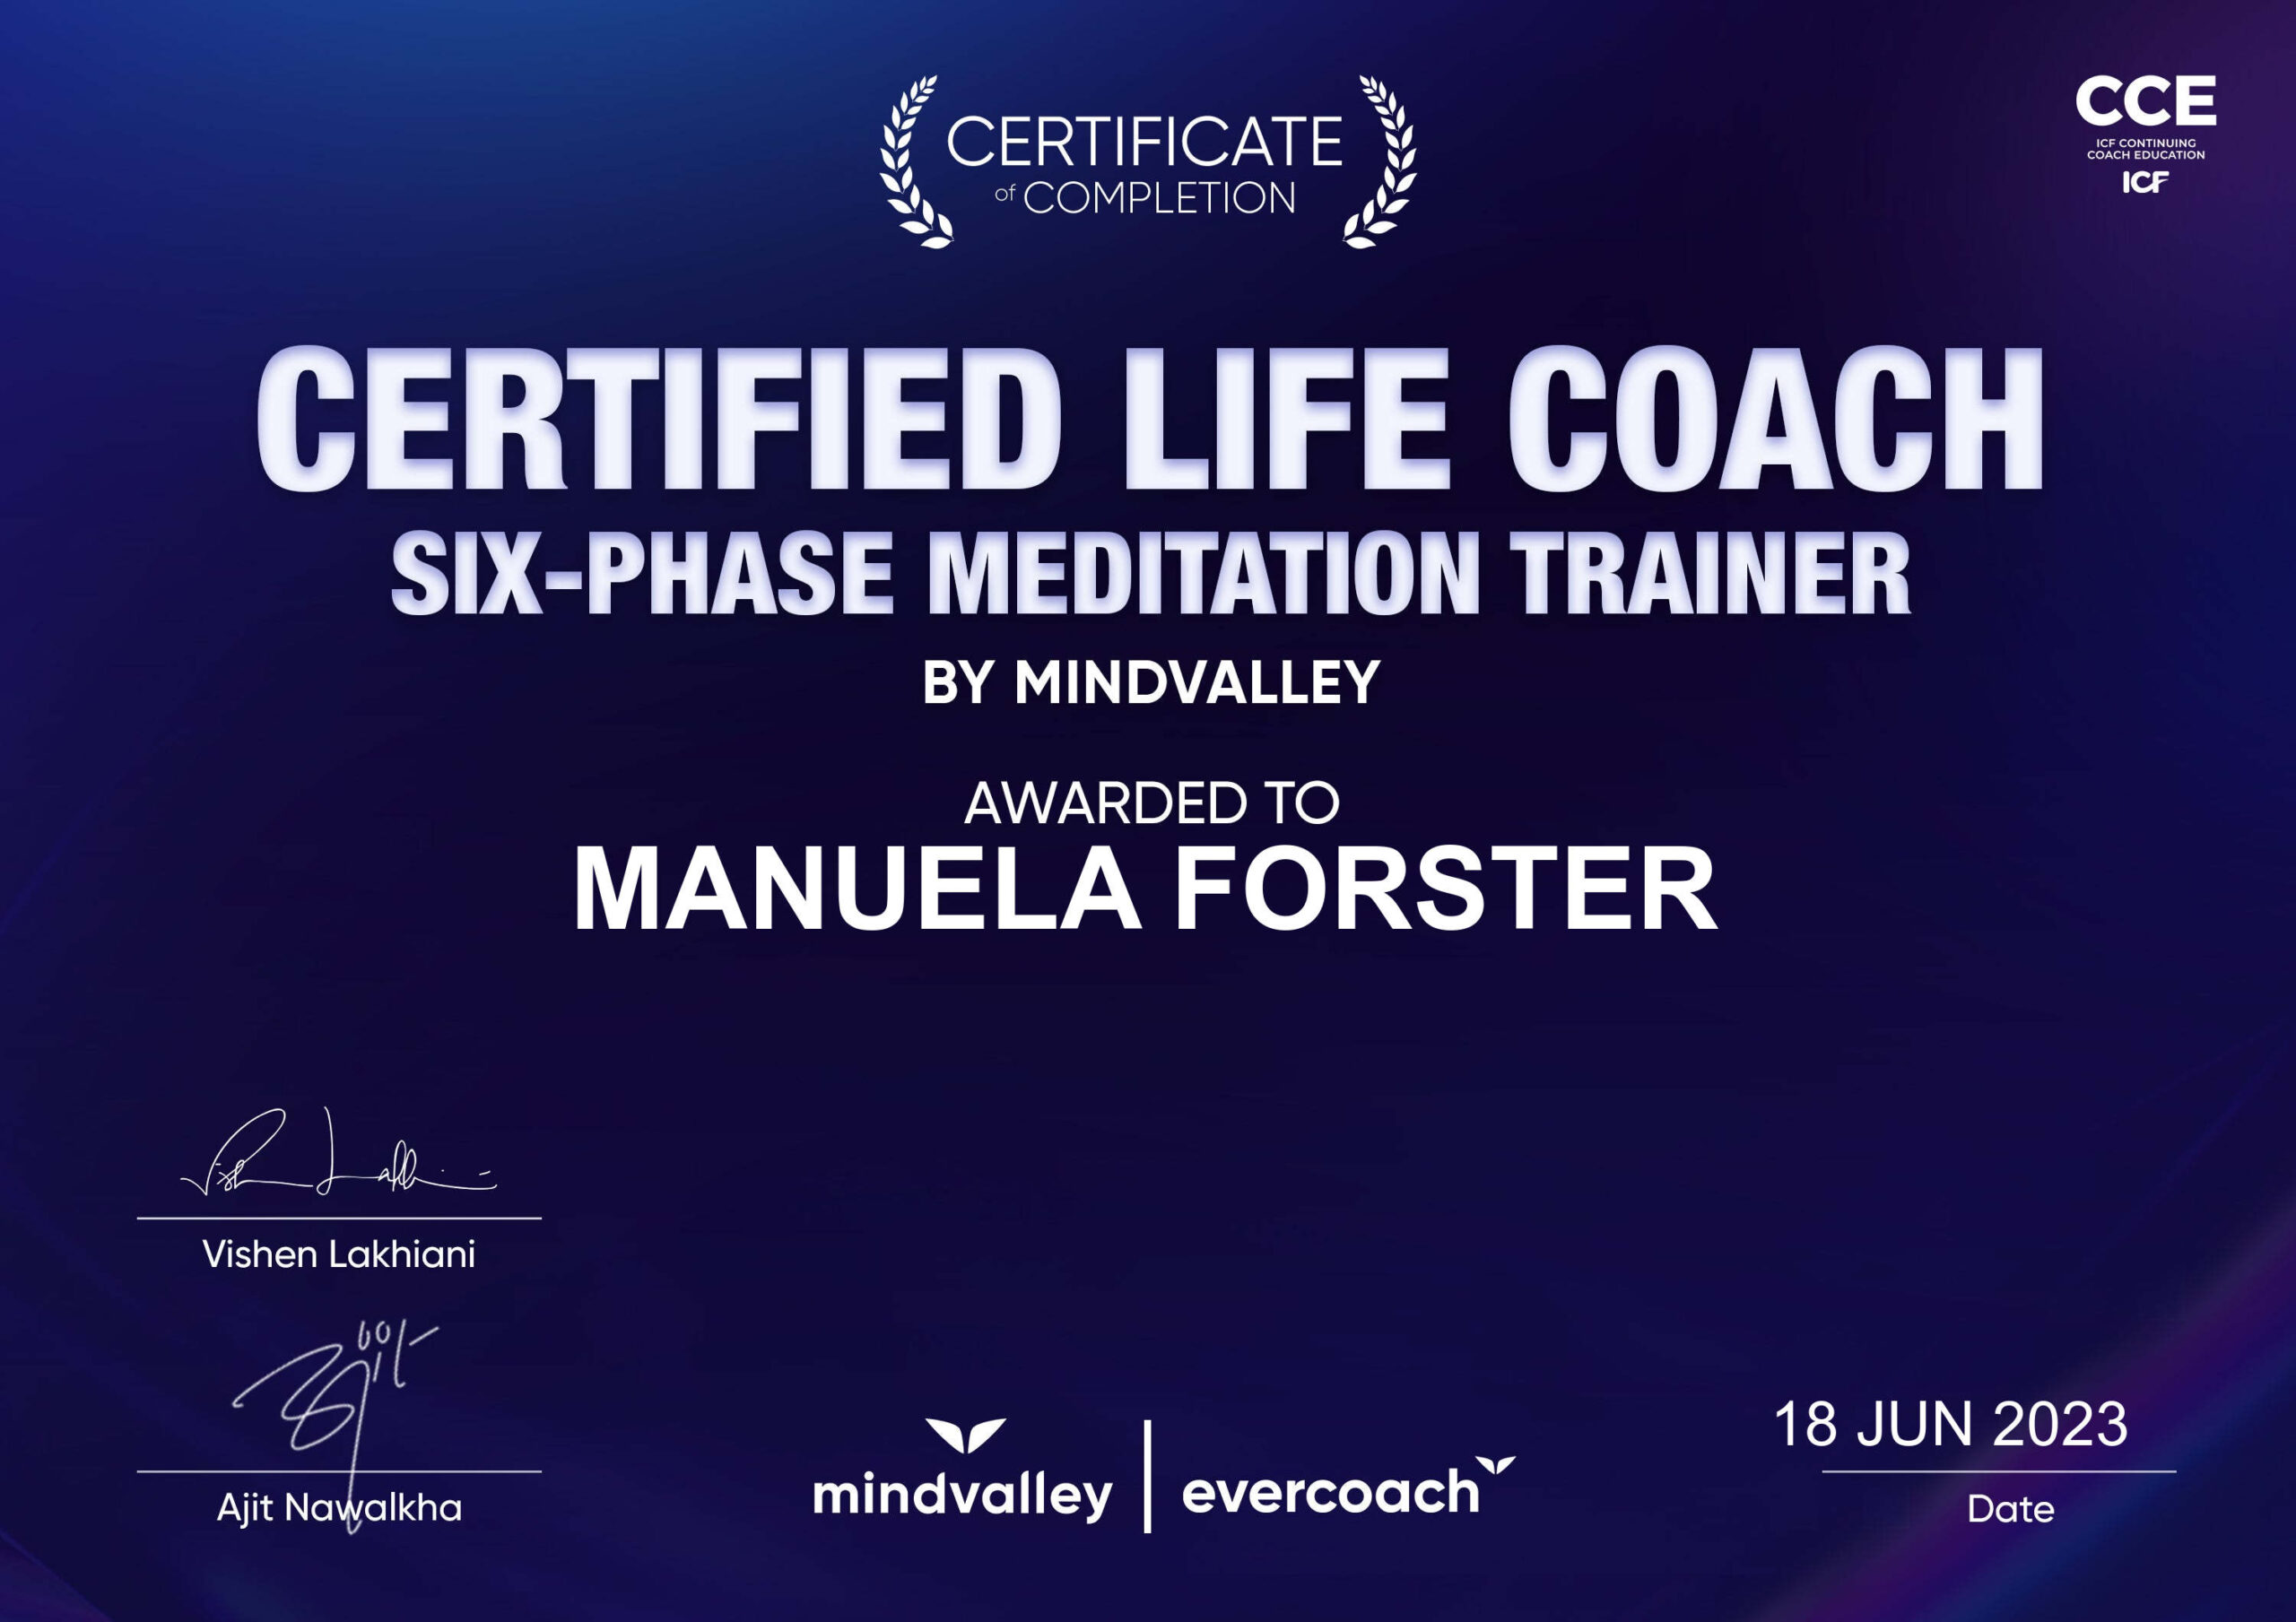 Certificate Mindvalley certified Life Coach & Six Phase Meditation Trainer